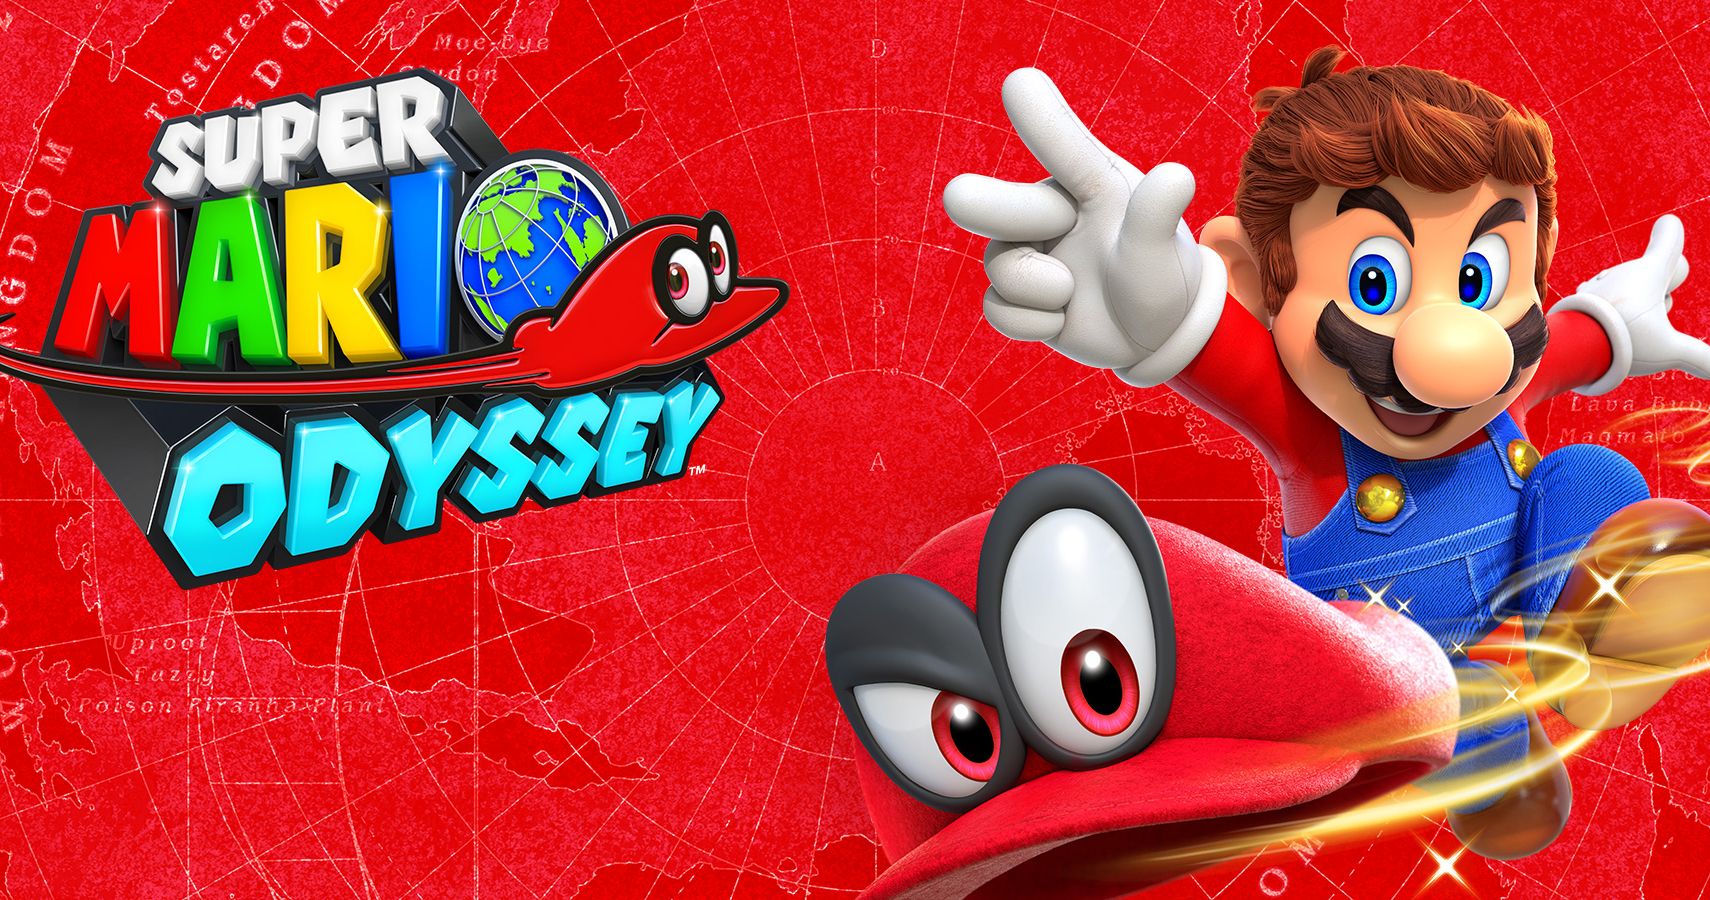 Super Mario Odyssey Has Sold Over 10 Million Units Worldwide